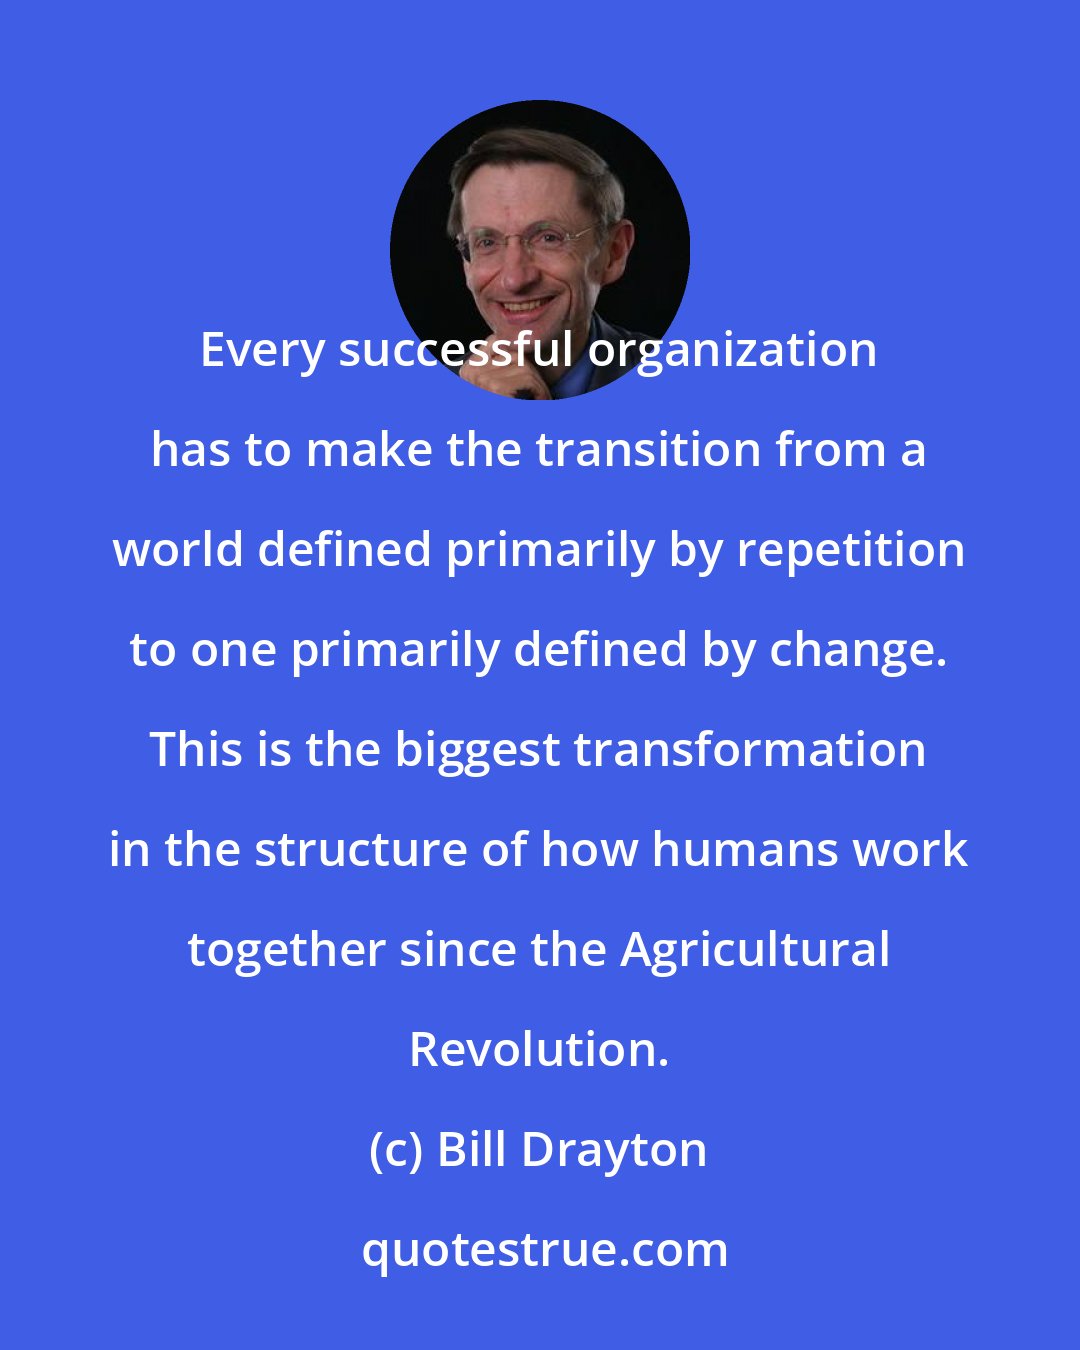 Bill Drayton: Every successful organization has to make the transition from a world defined primarily by repetition to one primarily defined by change. This is the biggest transformation in the structure of how humans work together since the Agricultural Revolution.